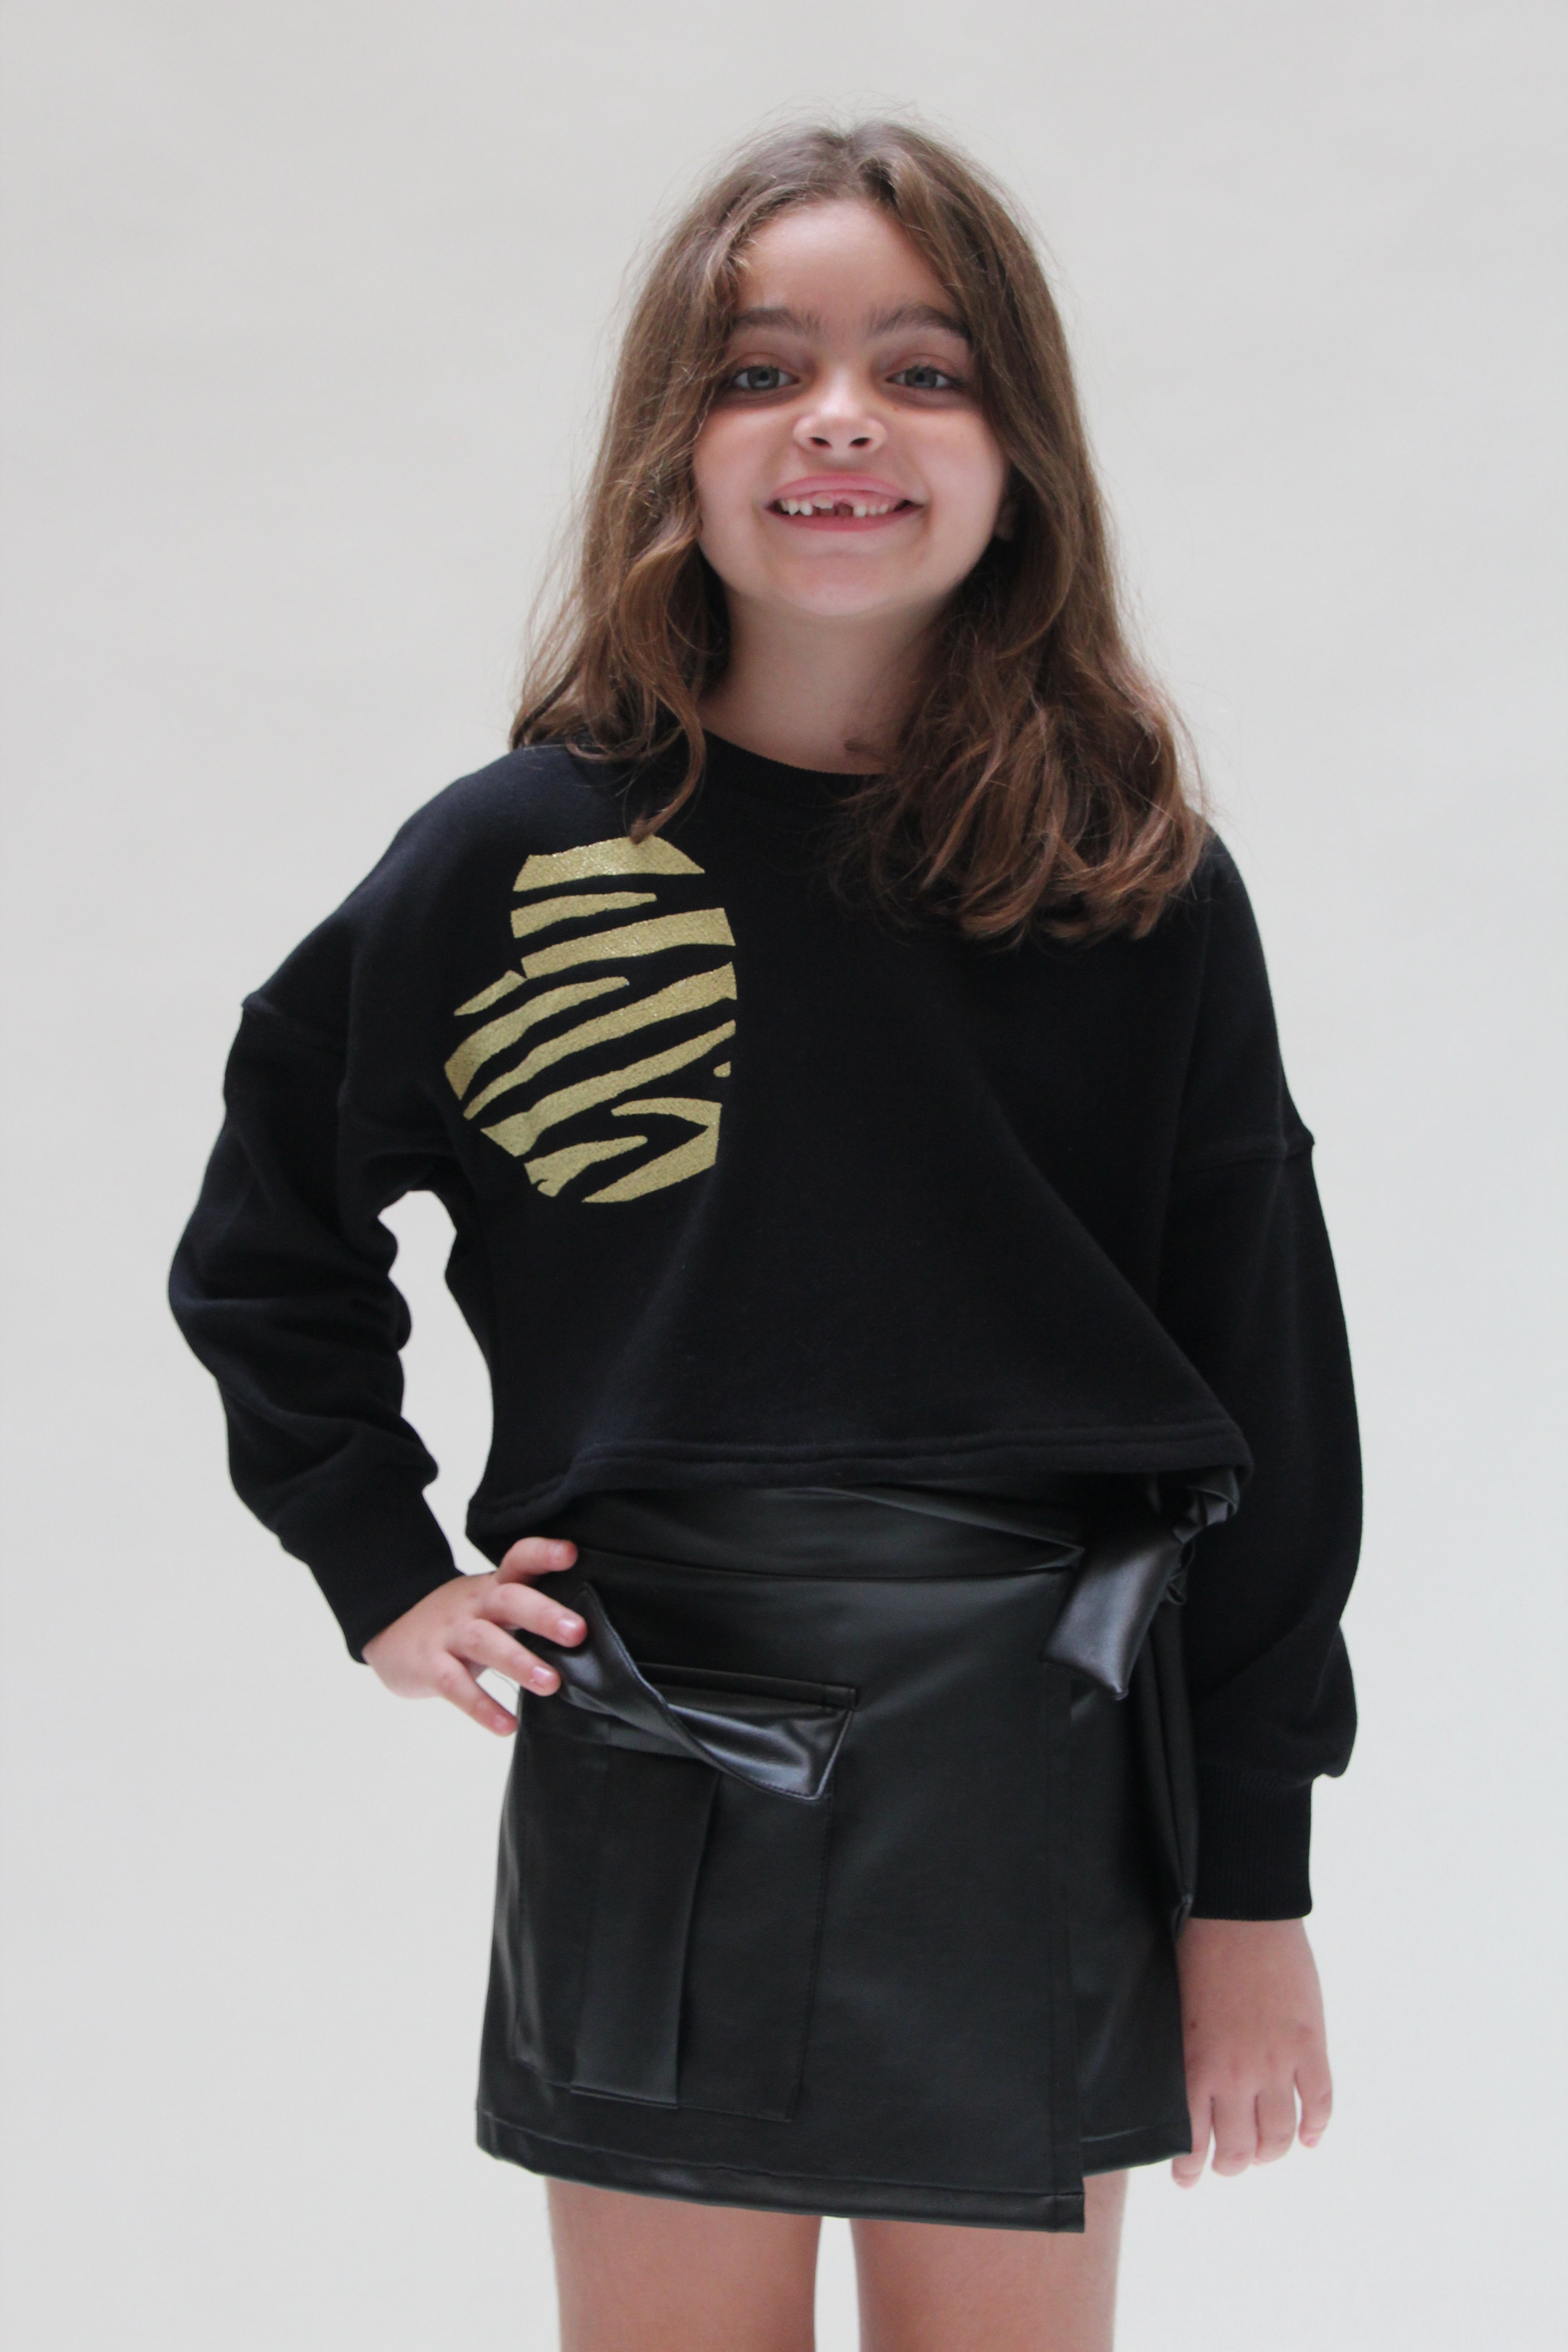 Sweatshirt with Studs on the back For Girls - Black